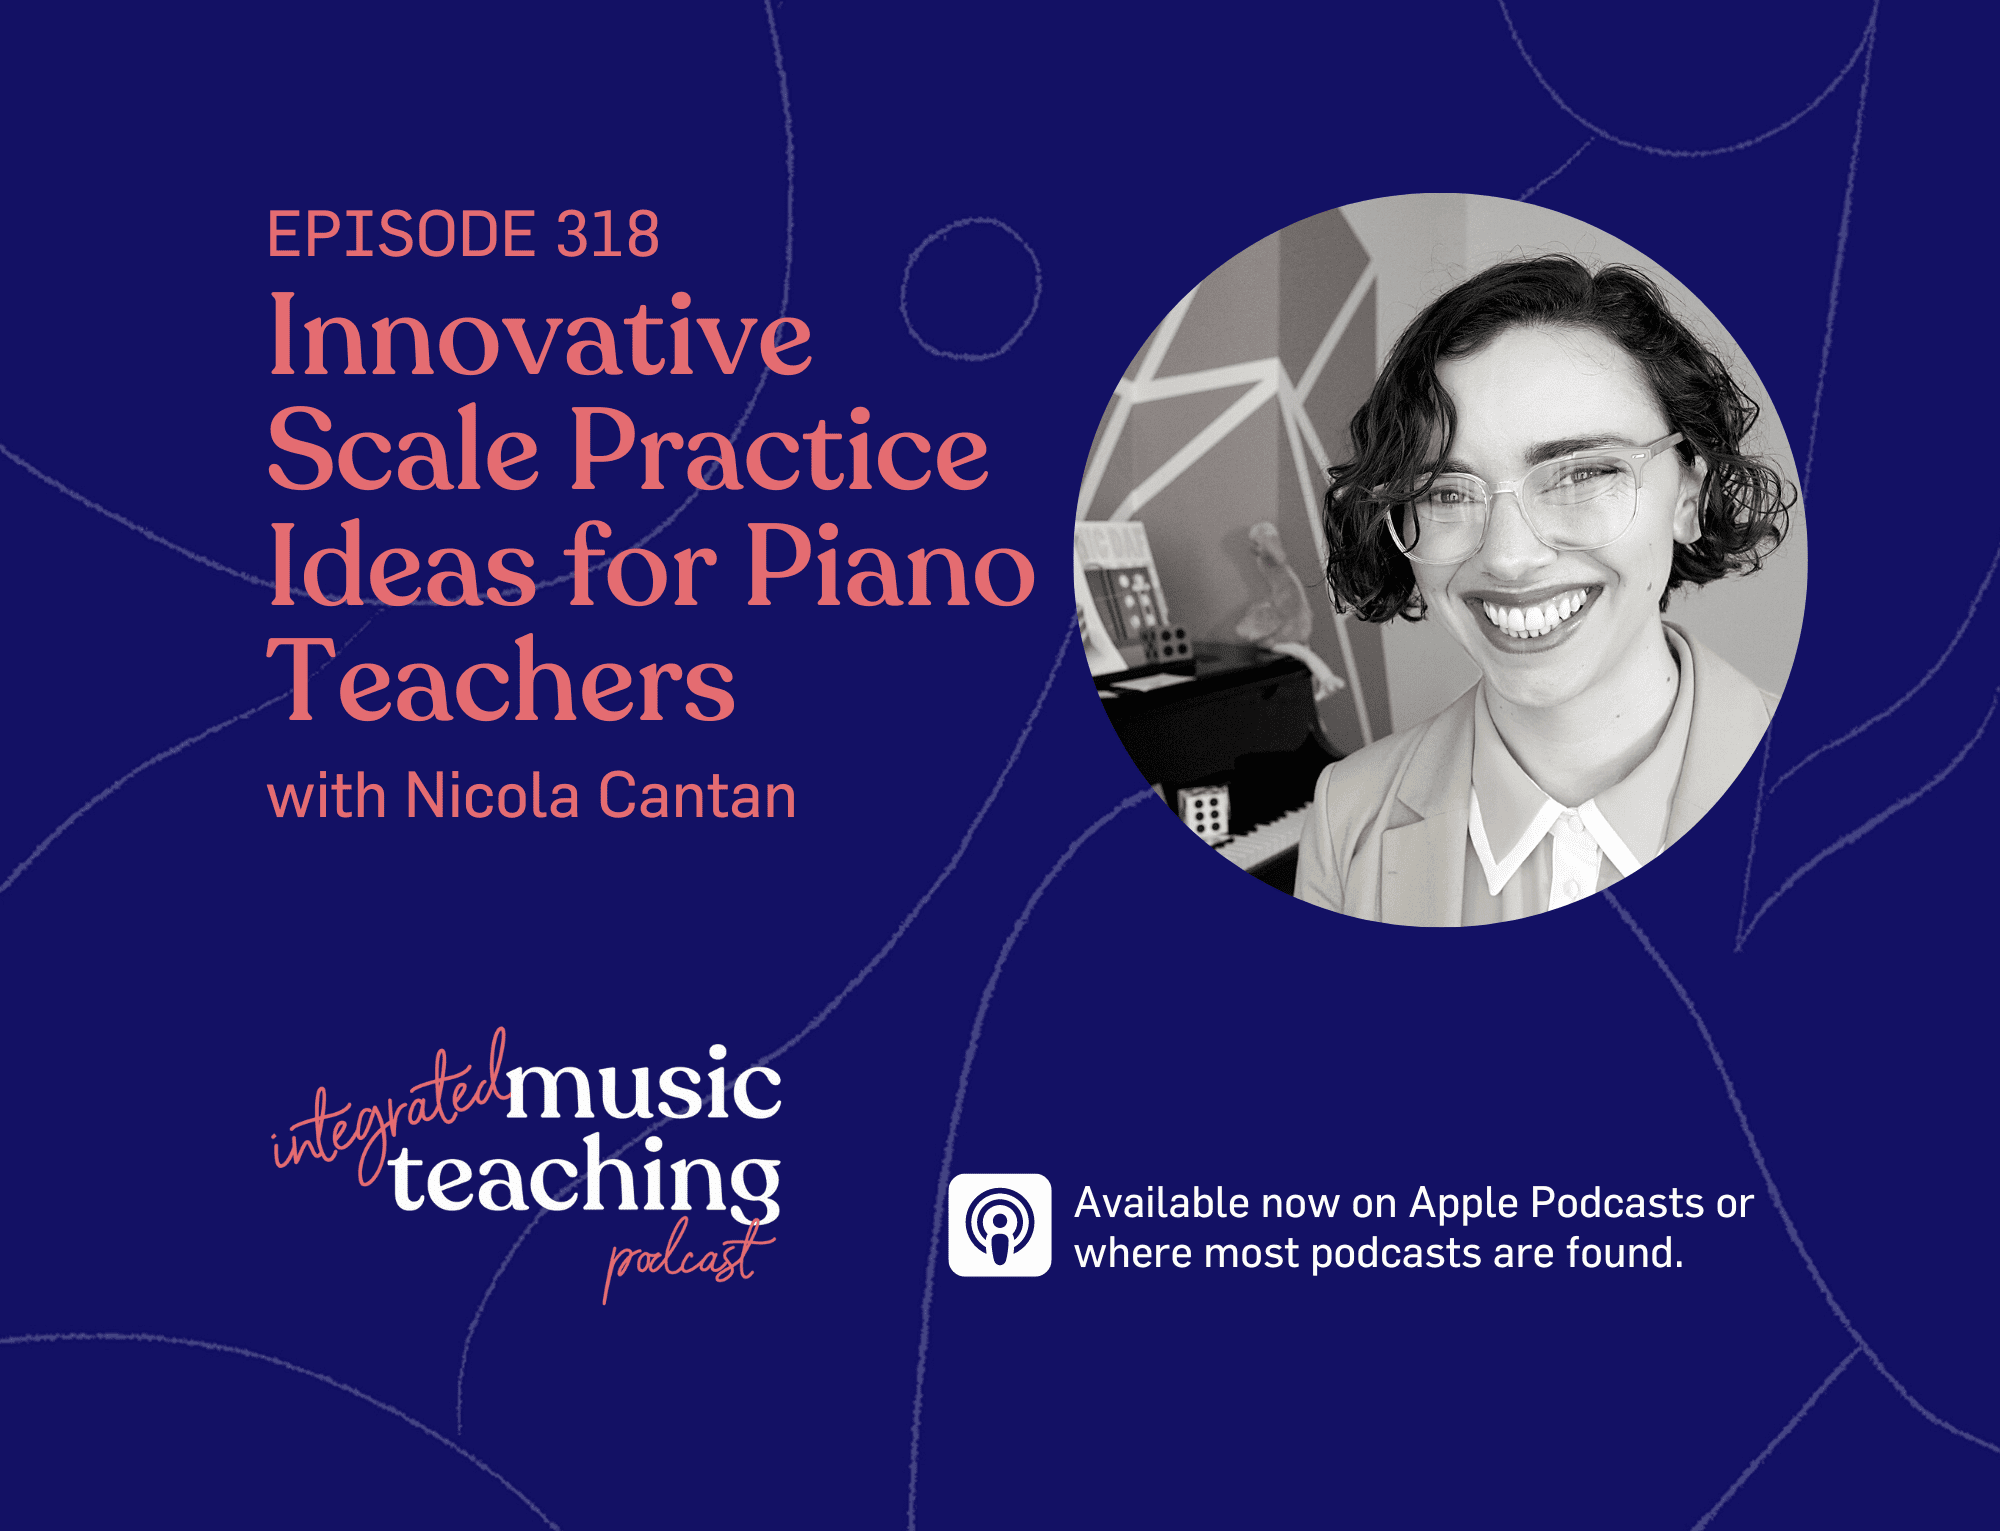 Innovative Scale Practice Ideas for Piano Teachers with Nicola Cantan